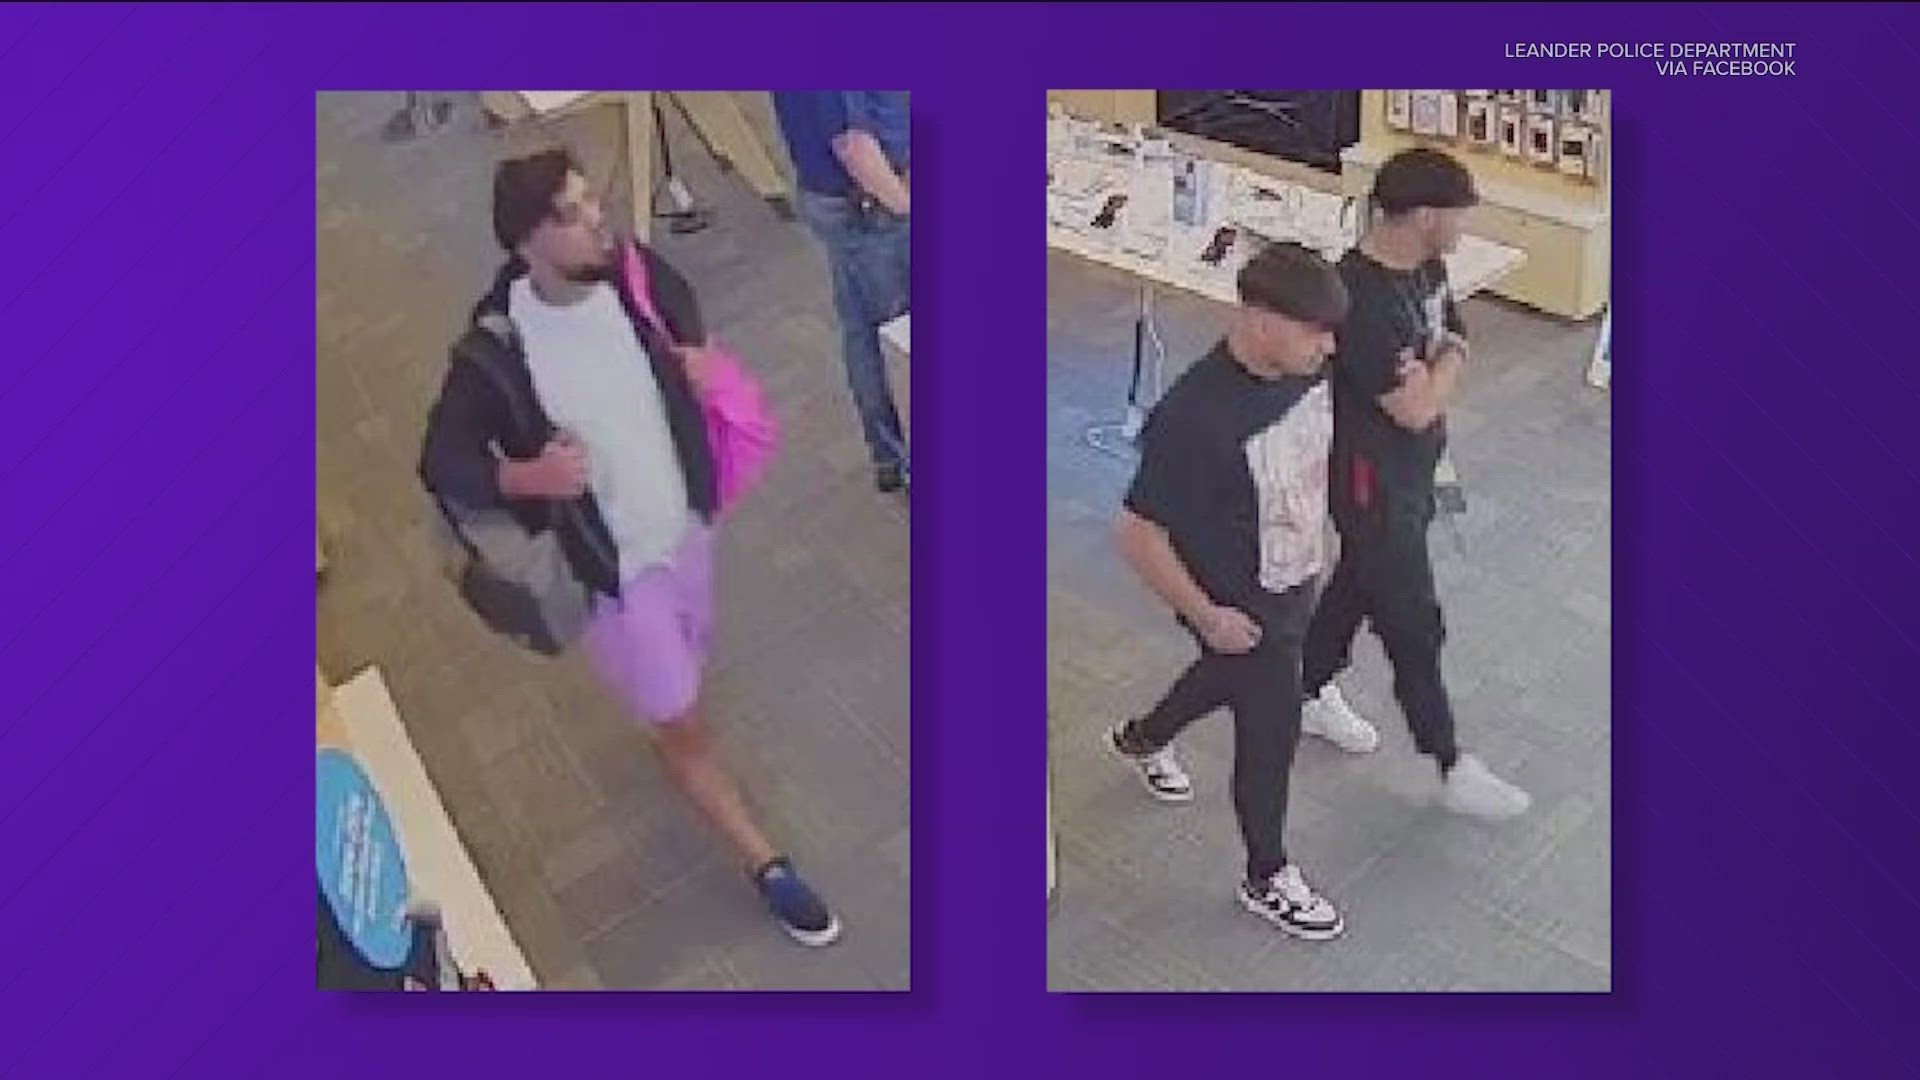 Leander police are looking for three people that they say got away with about $50,000 worth of merchandise from an AT&T store.